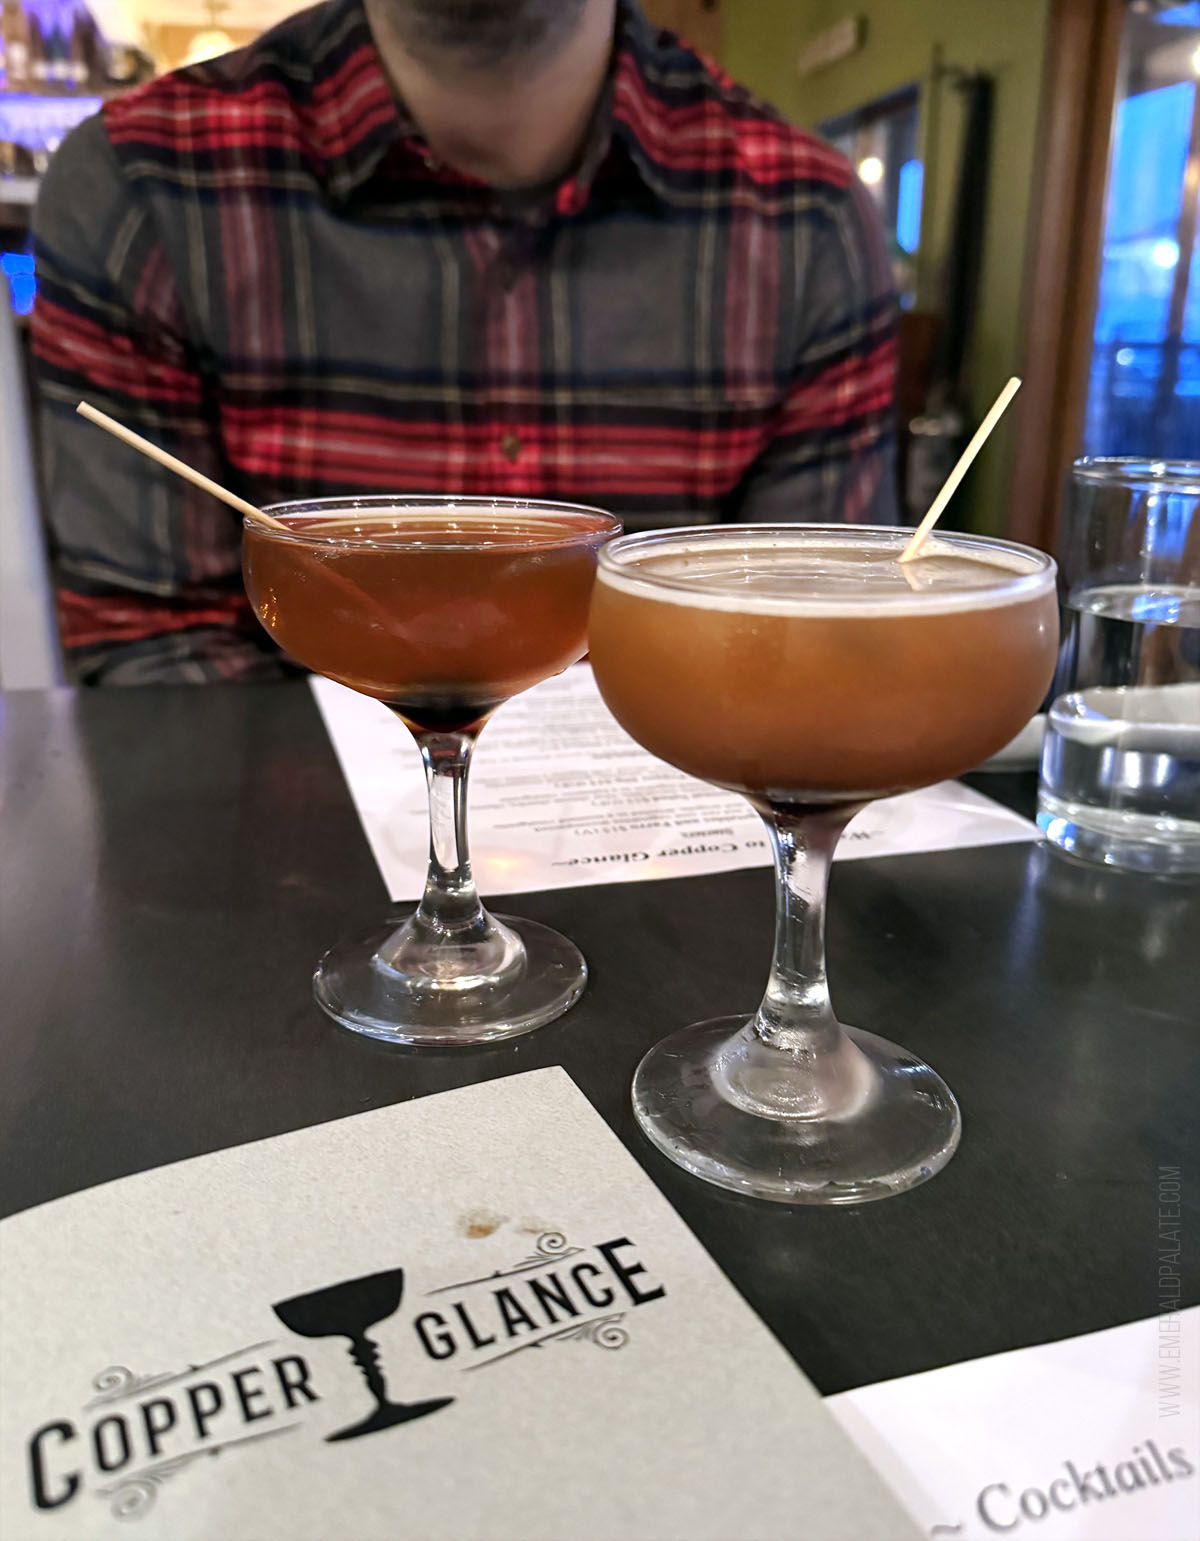 cocktails from Copper Glance